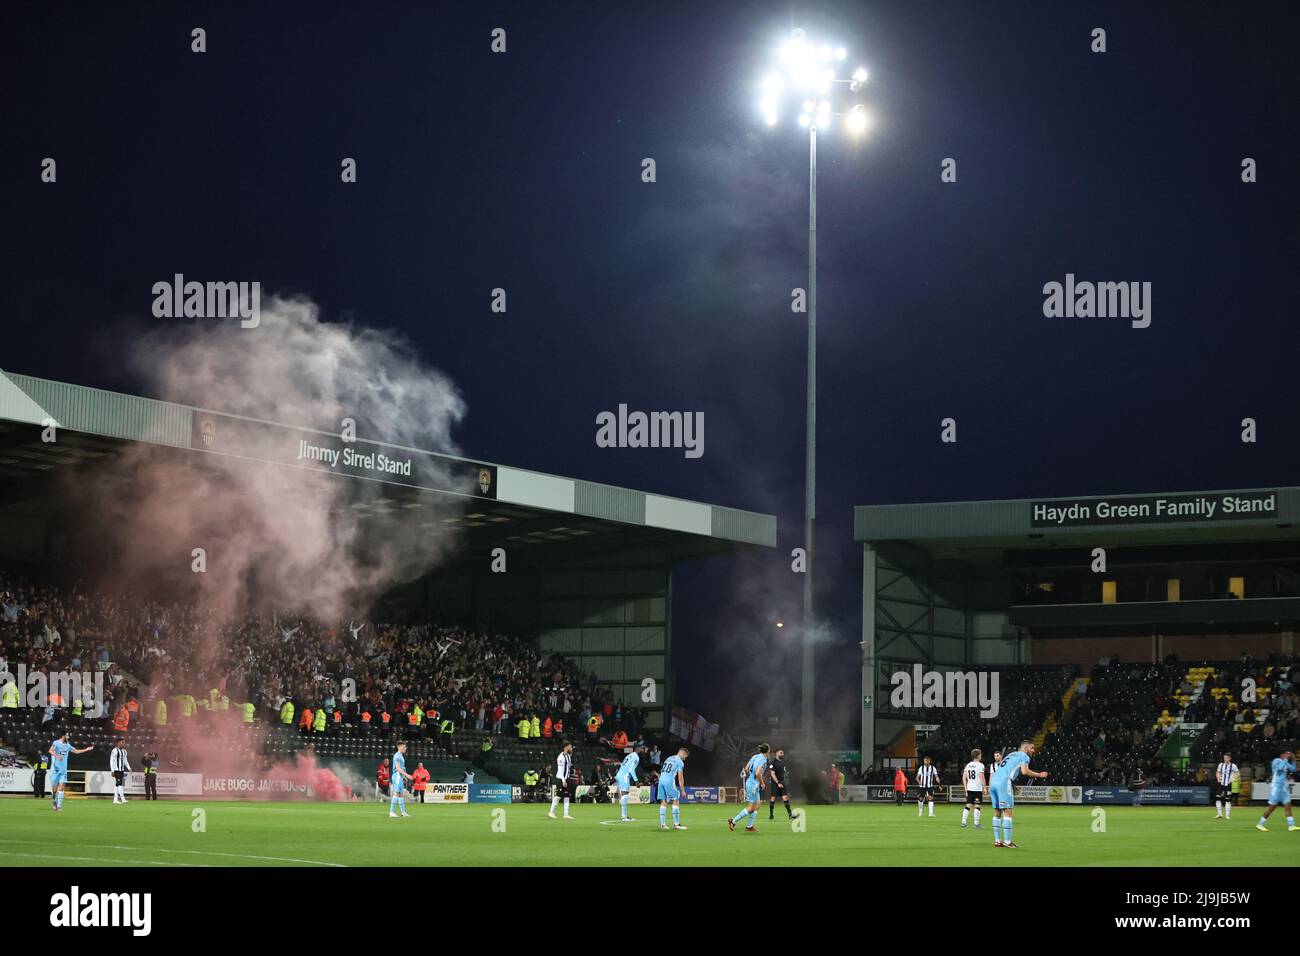 NOTTINGHAM, ENGLAND. MAY 23RD 2022. Flares are thrown onto the edge of the pitch after Grimsby score during the Vanarama National League Play-Off match between Notts County and Grimsby Town at Meadow Lane, Nottingham. (Credit: James Holyoak/Alamy Live News) Stock Photo